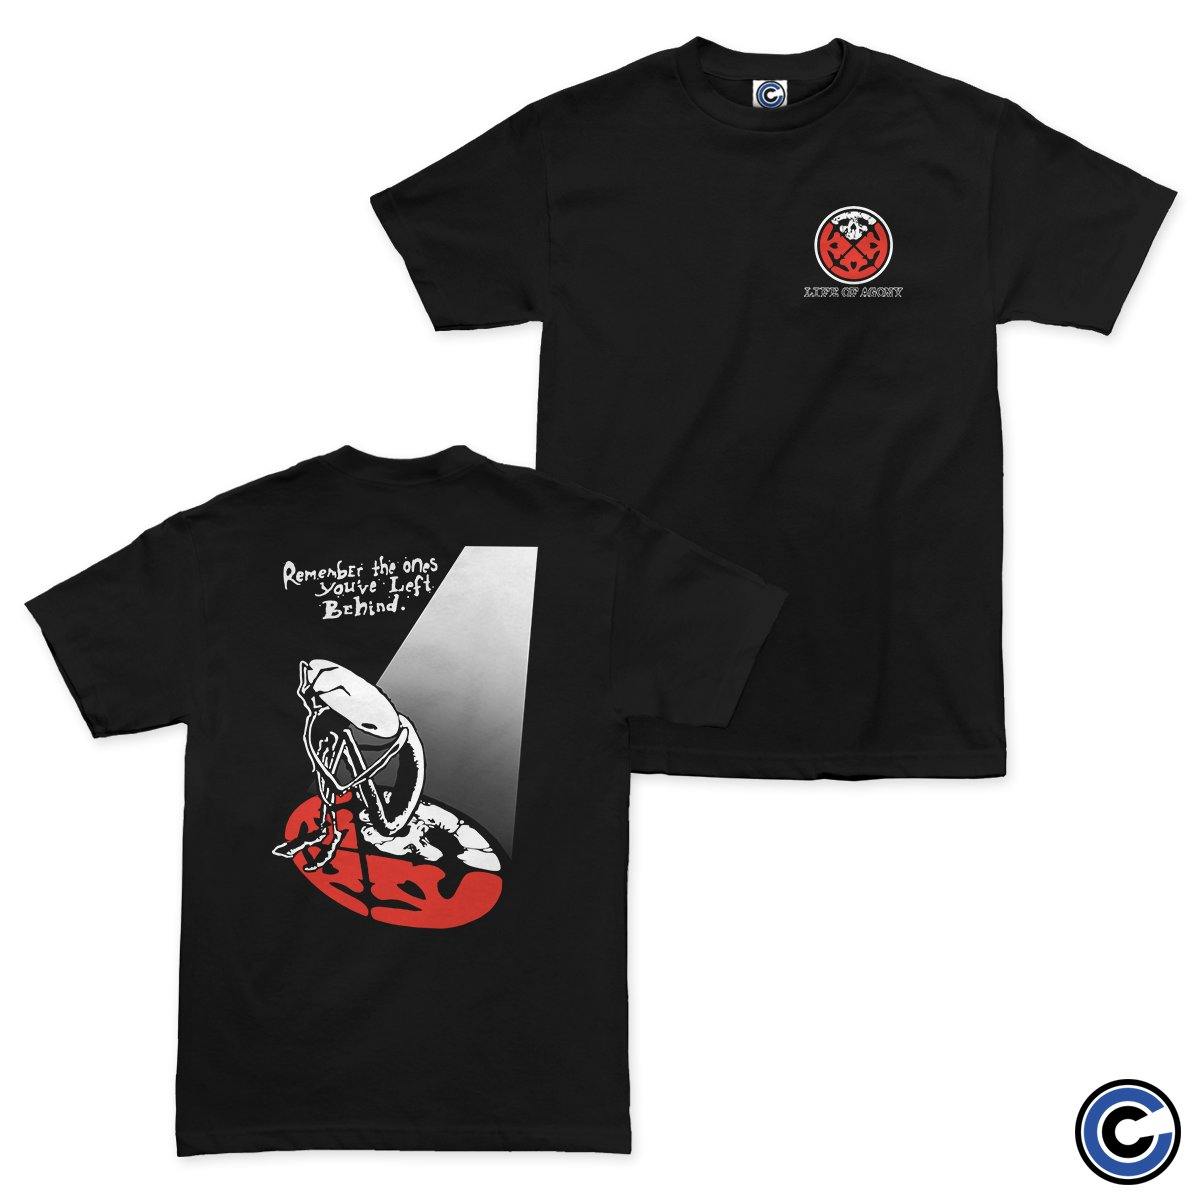 Buy – Life of Agony "Left Behind" Shirt – Band & Music Merch – Cold Cuts Merch